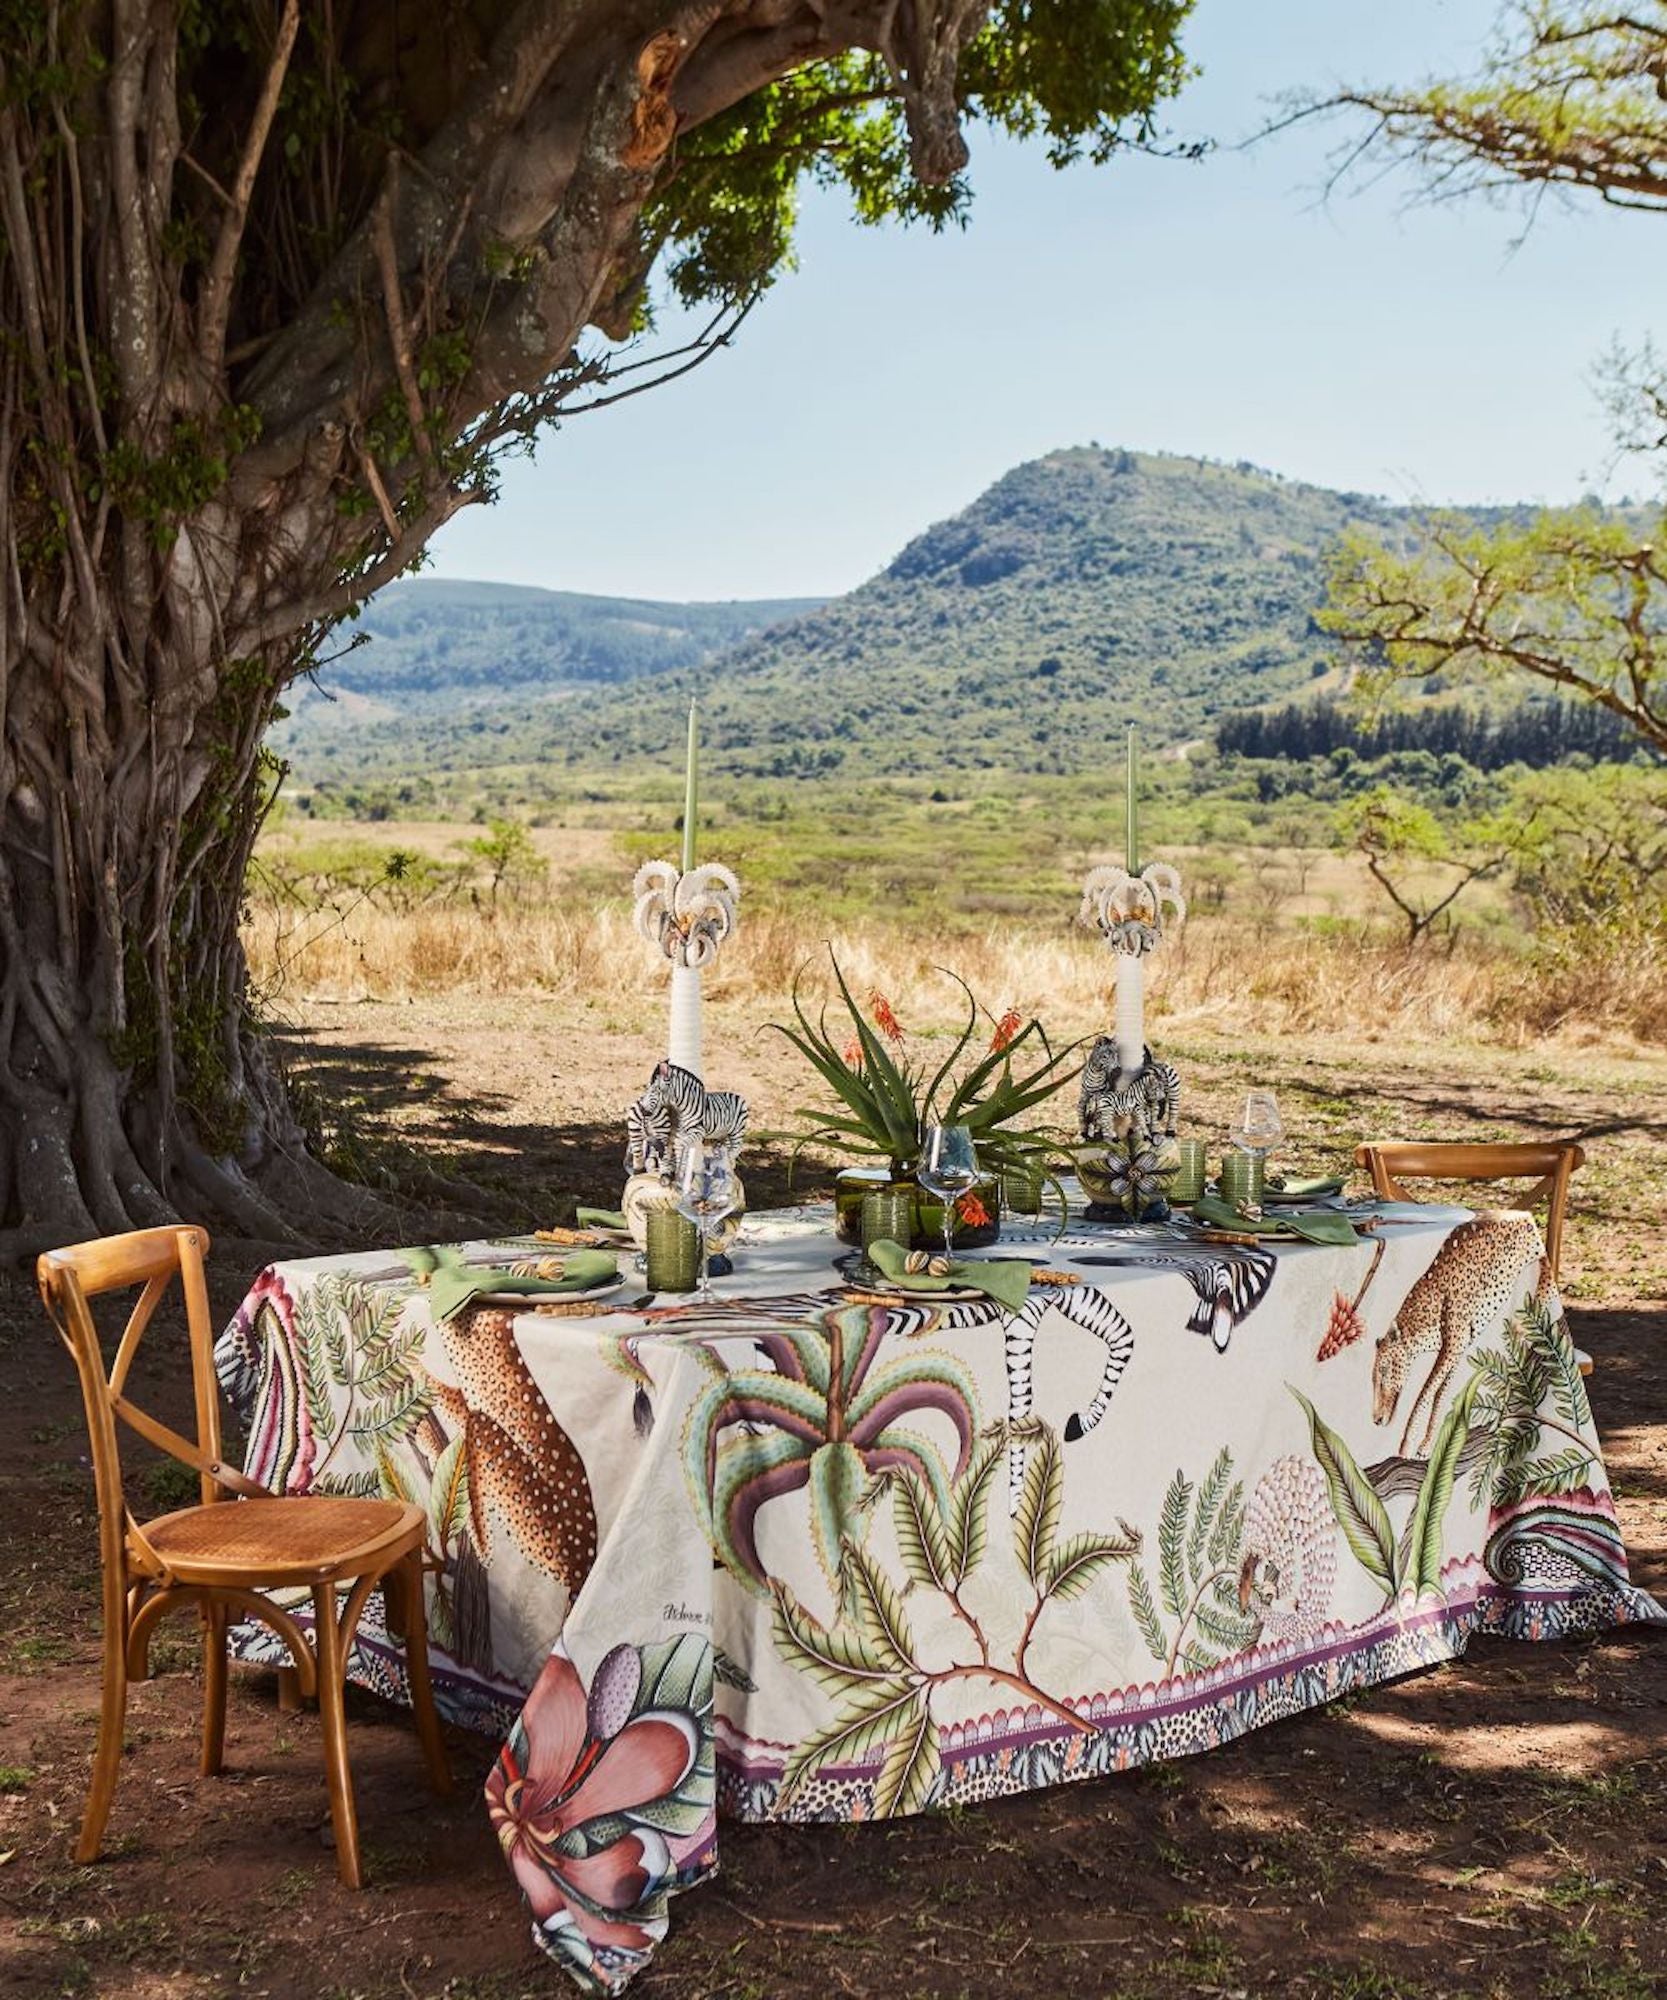 Ardmore Pangolin Stripe cotton tablecloth from South Africa